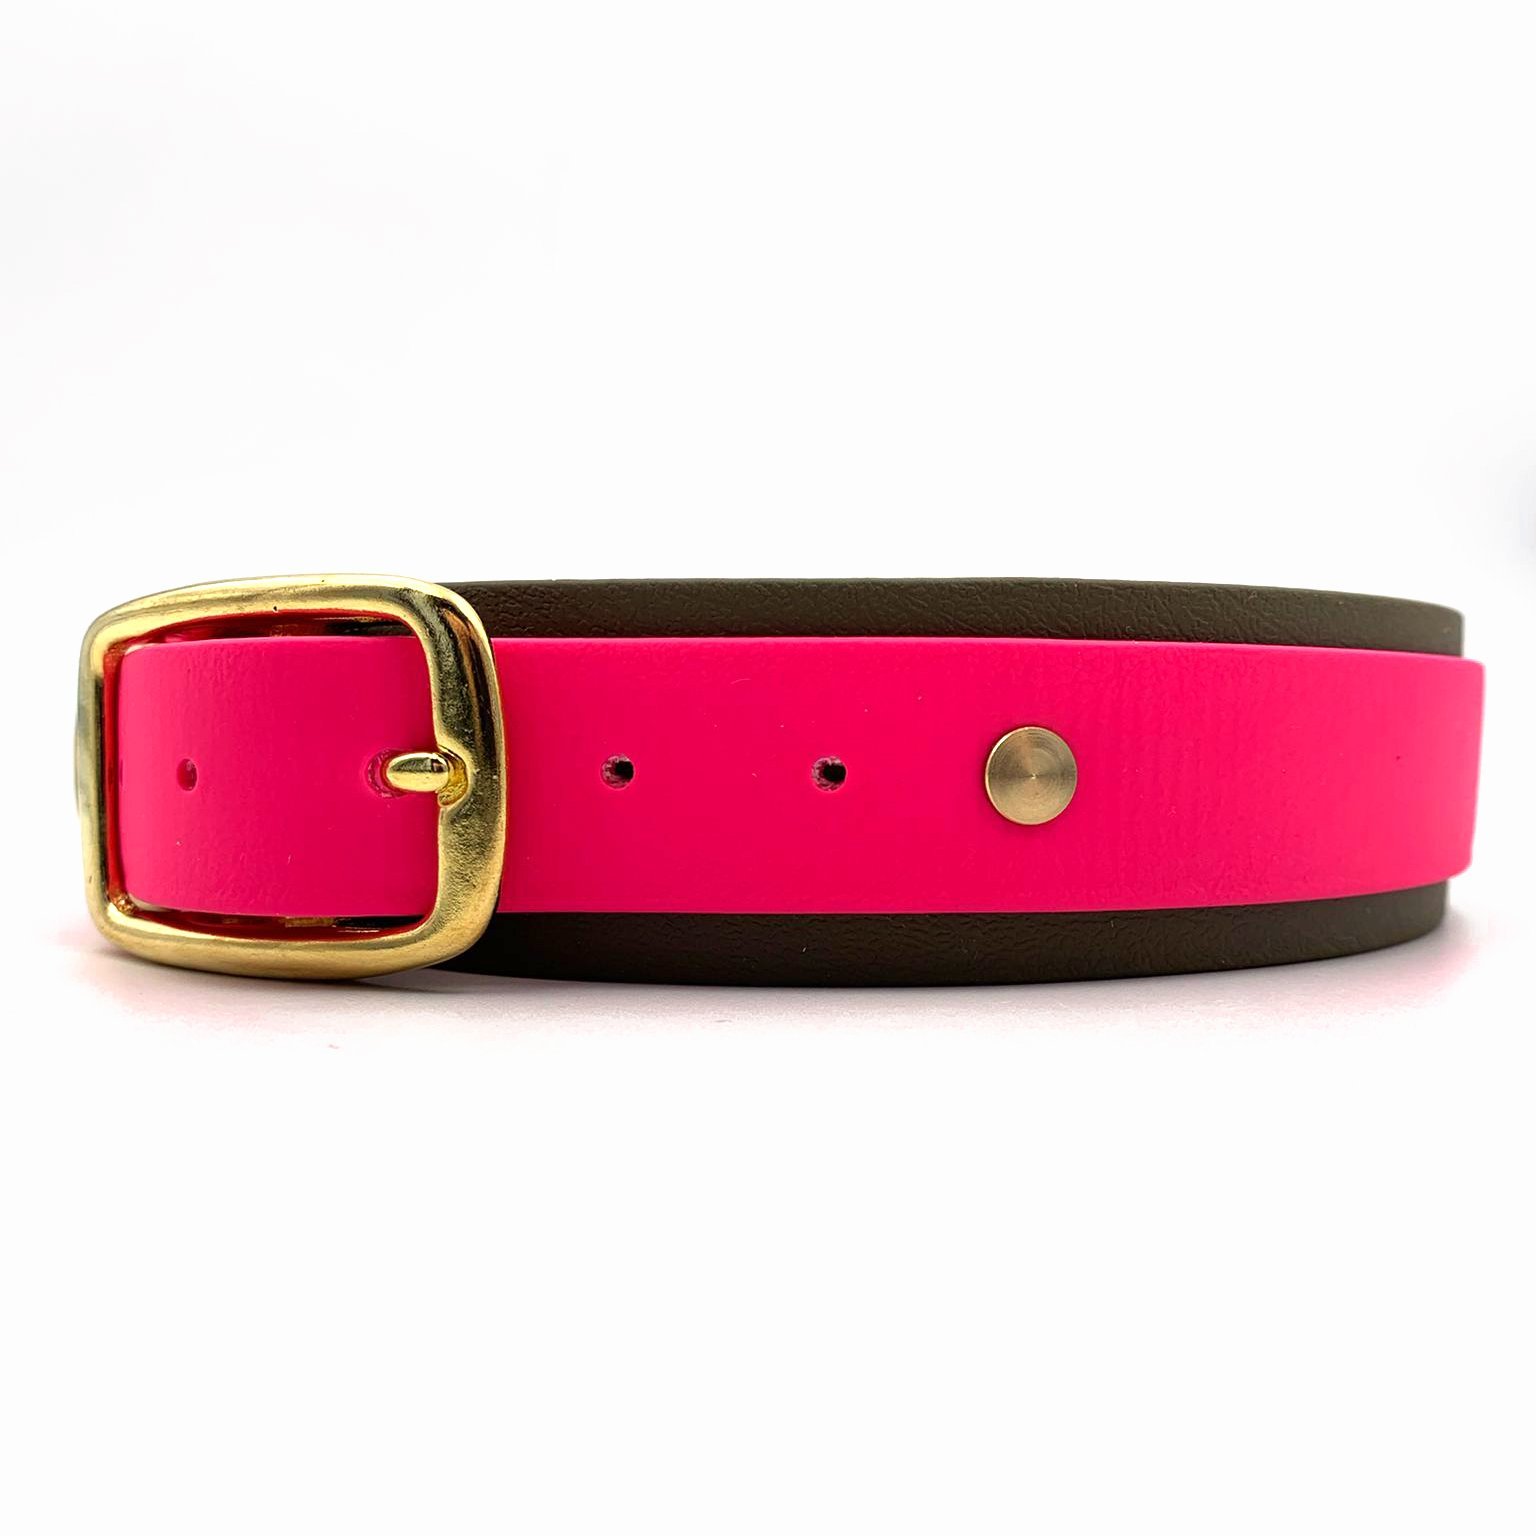 Biothane Halsband "Two Colours" - 4 cm - PINK/OLIV